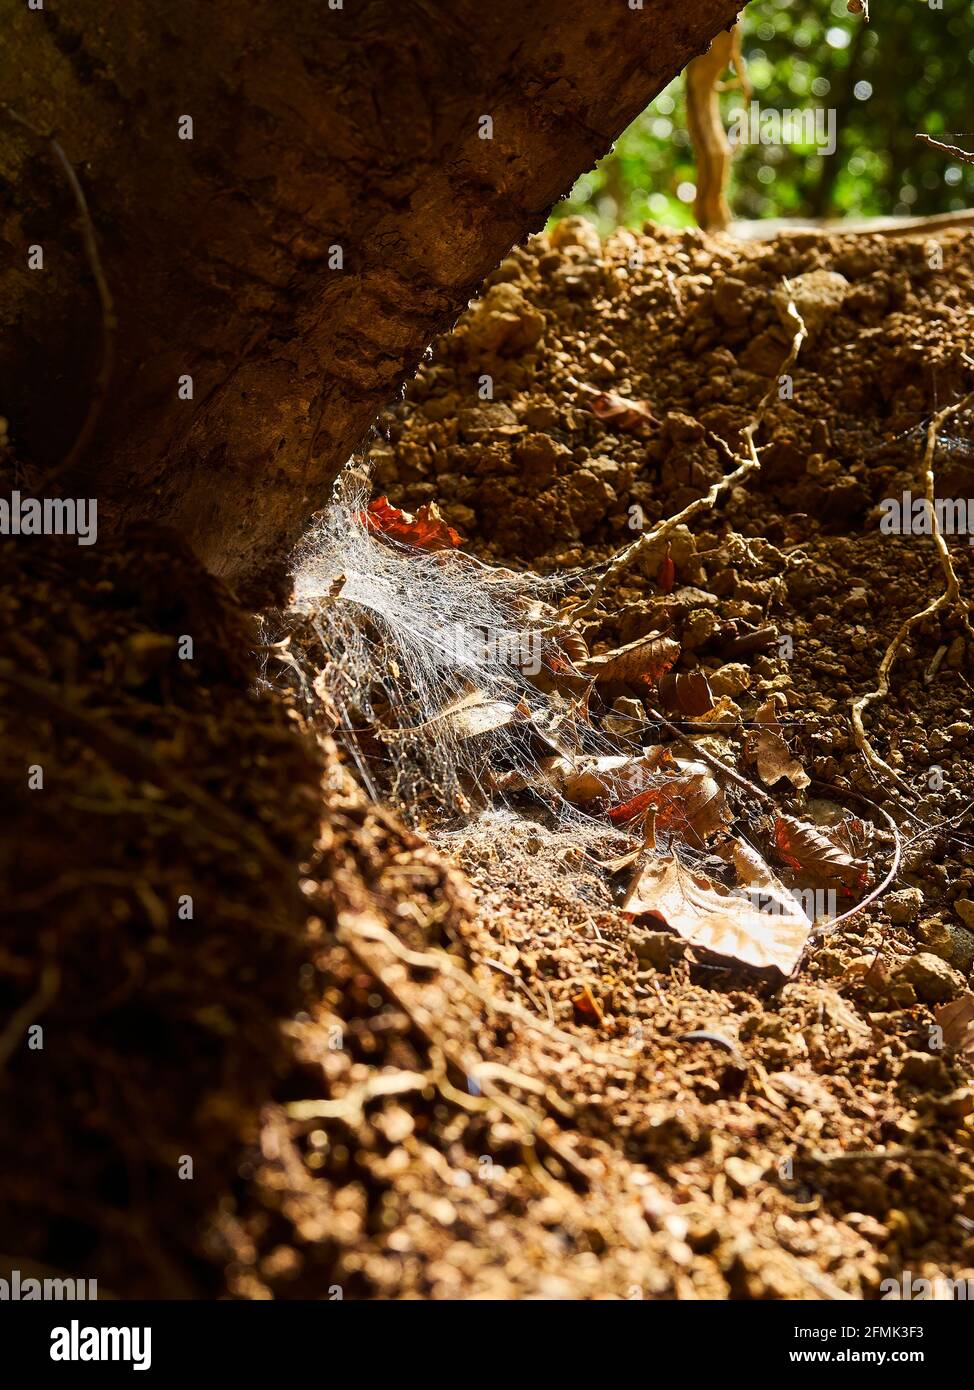 A detail from the forest floor of a patch of urban woodland; an extensive spider web, strewn with fallen autumn leaves, in the hole from a fallen tree Stock Photo